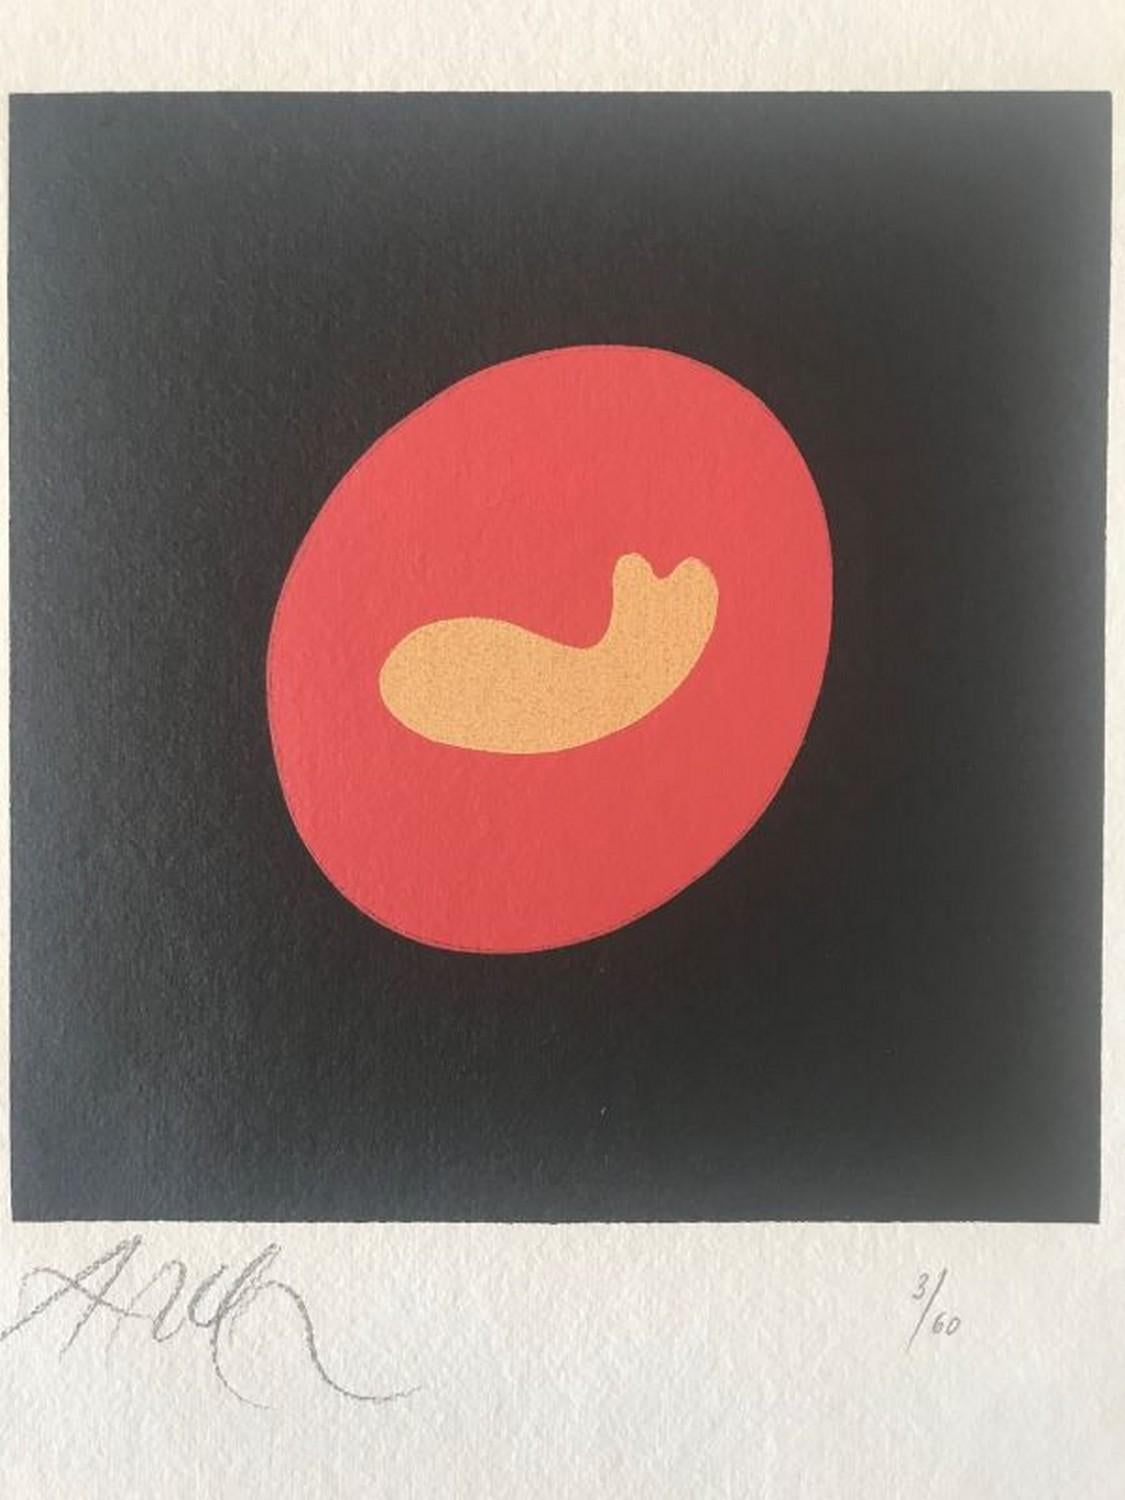 Soleil recerclé  - Abstract Print by Hans Arp